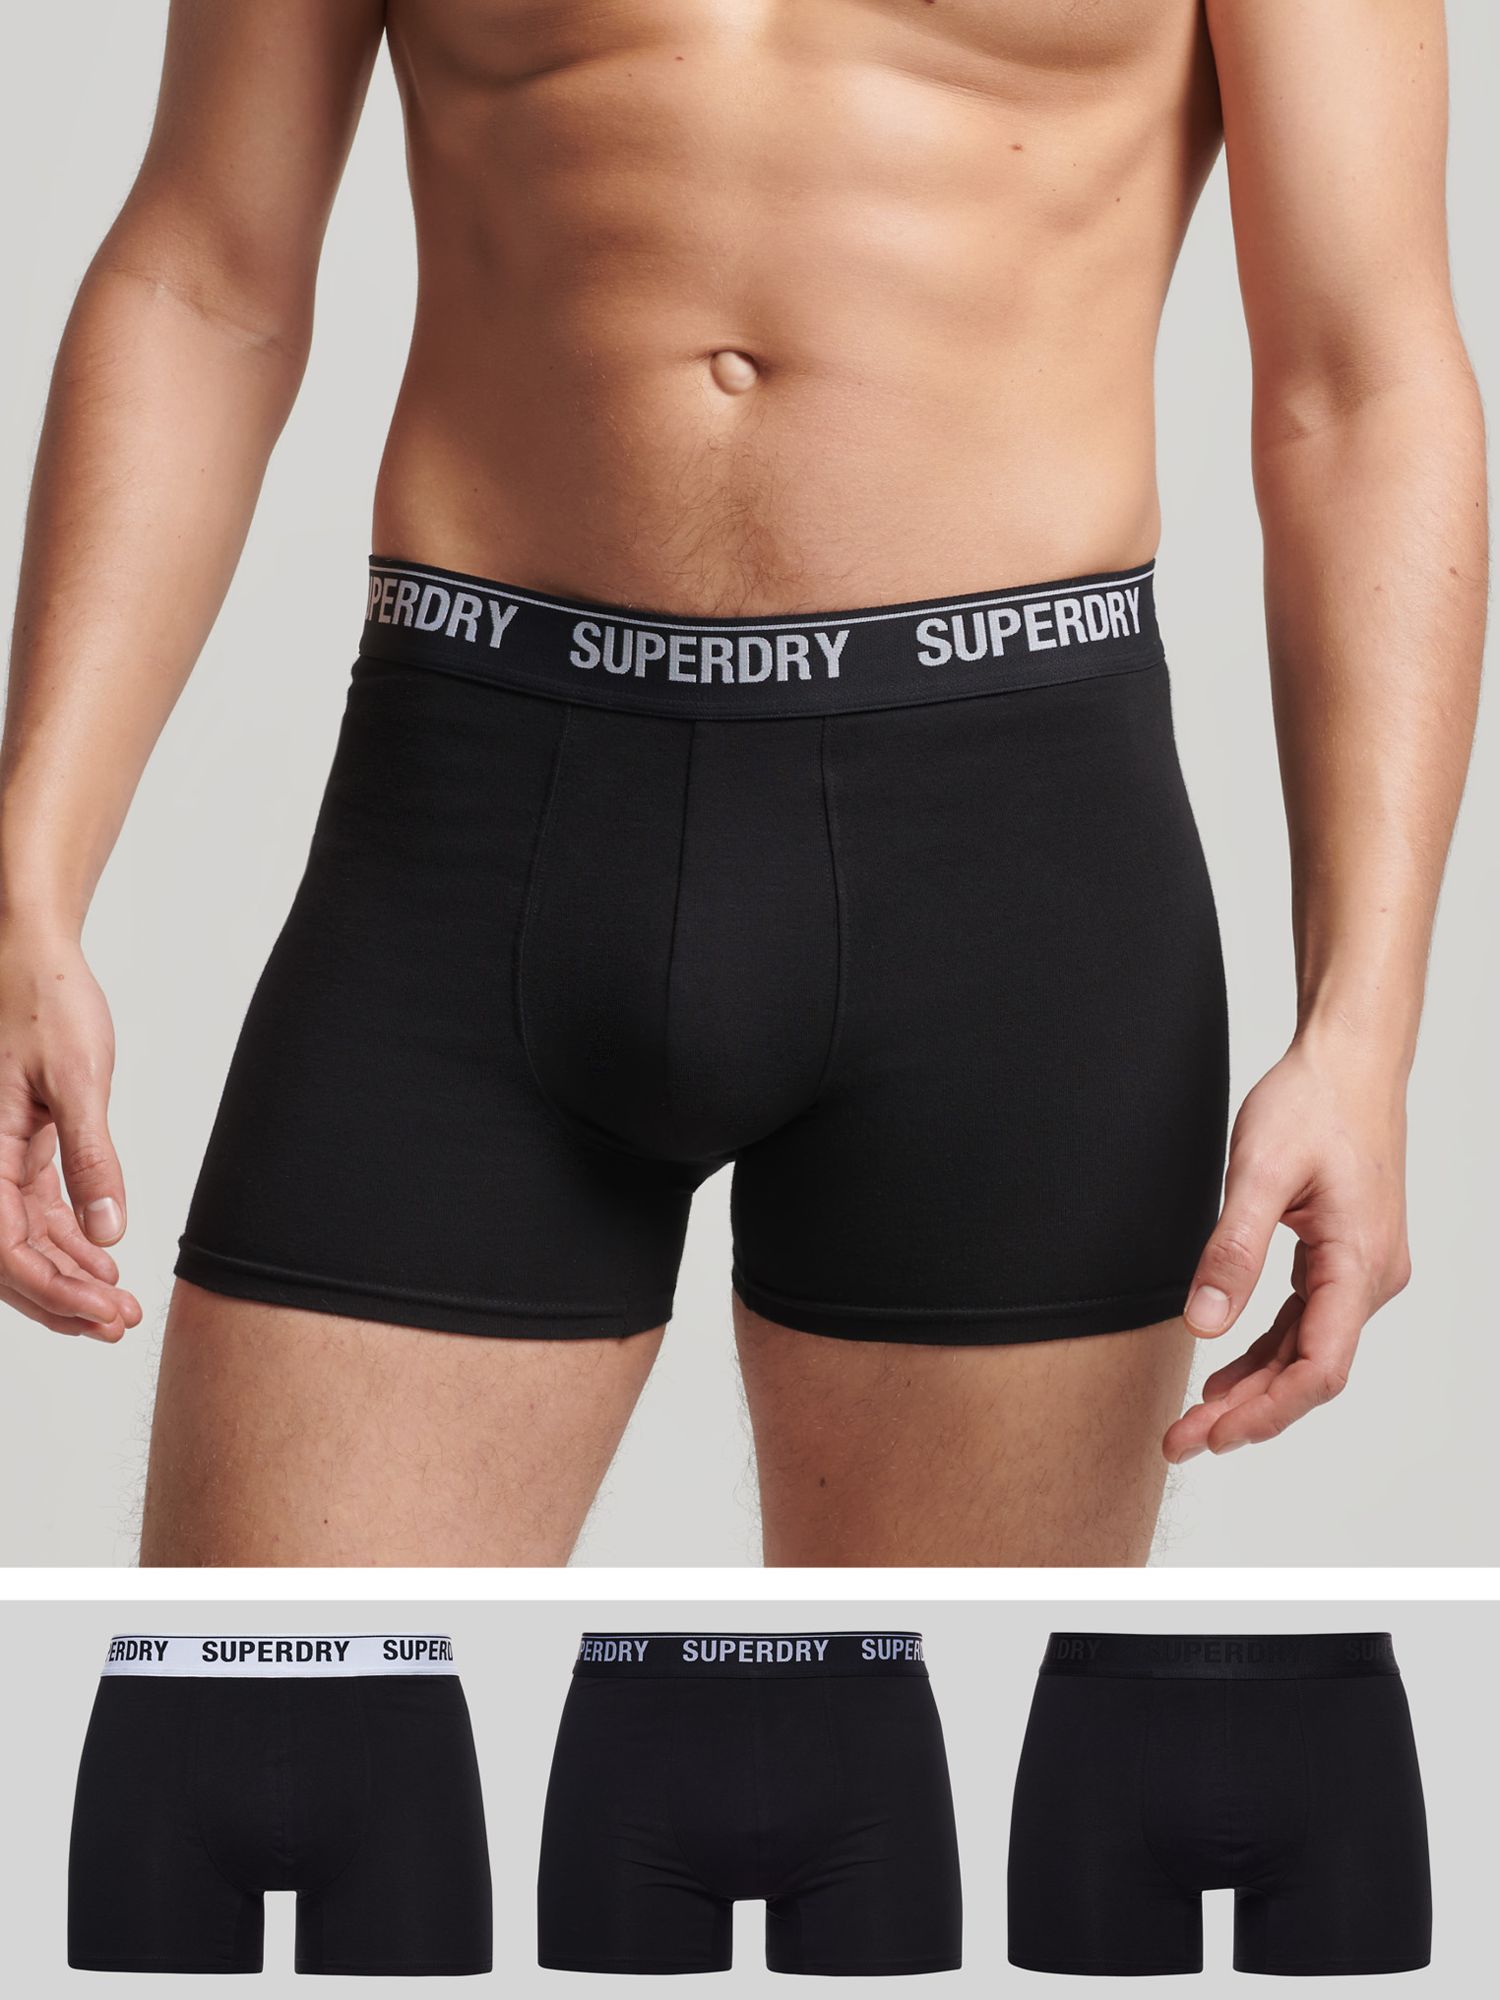 Superdry Organic Cotton Blend Band Boxers, Pack of 3, Black at John Partners